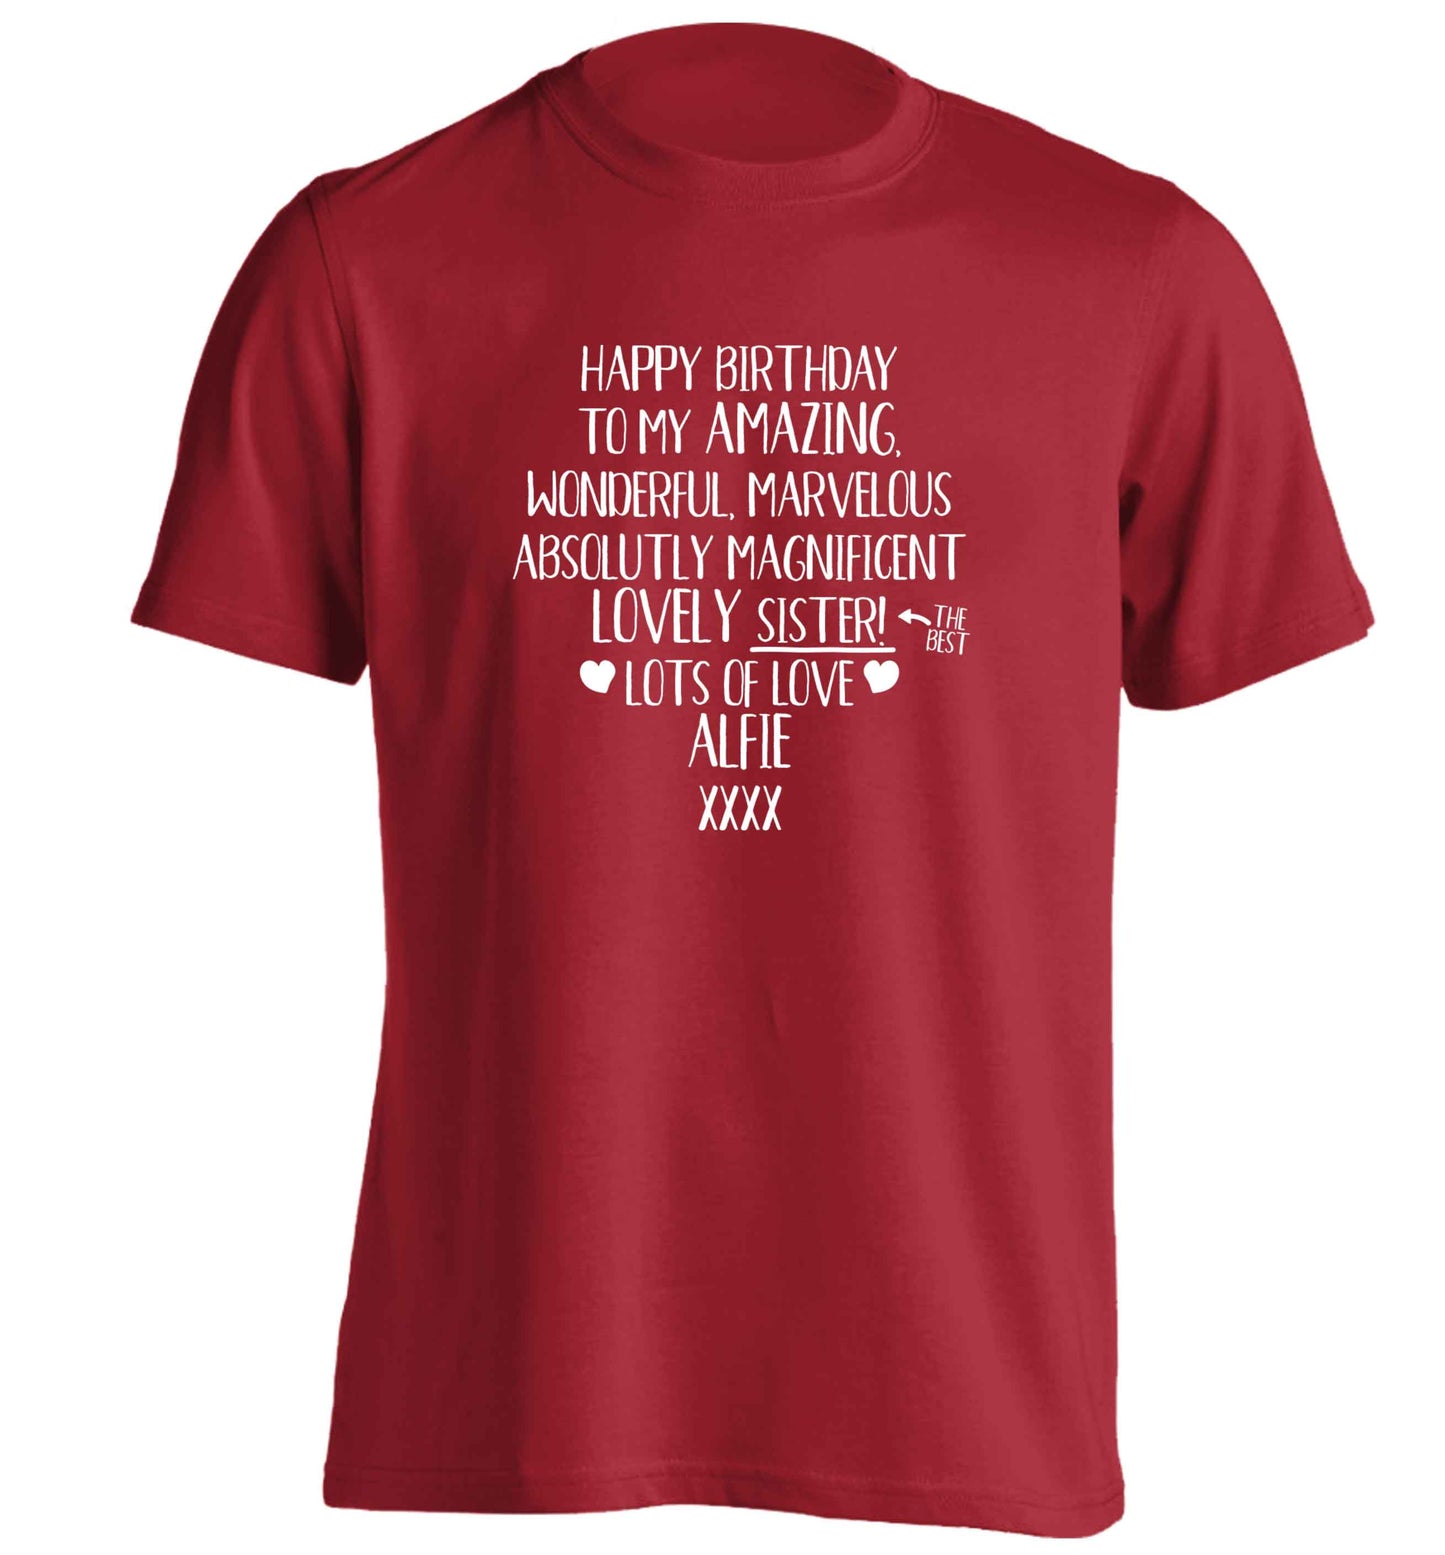 Personalised happy birthday to my amazing, wonderful, lovely sister adults unisex red Tshirt 2XL